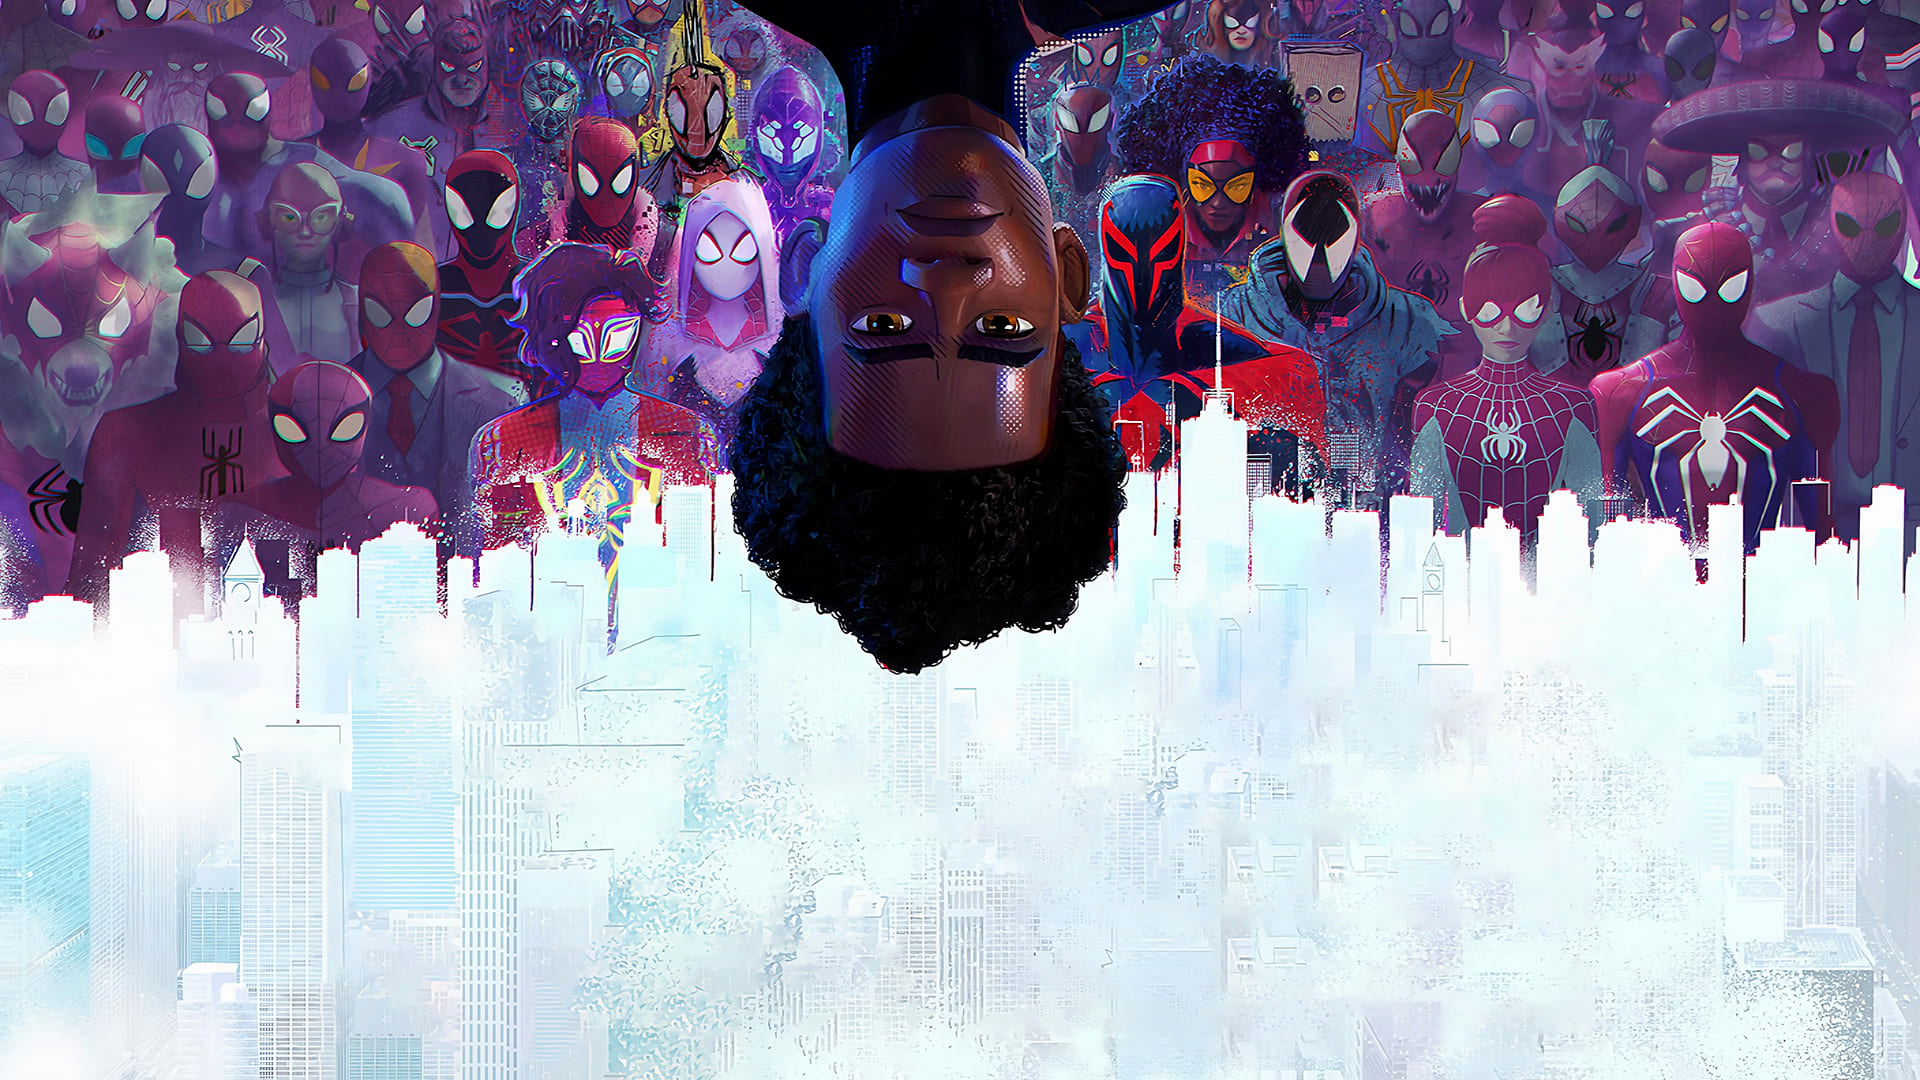 Across The Spider Verse Wallpapers